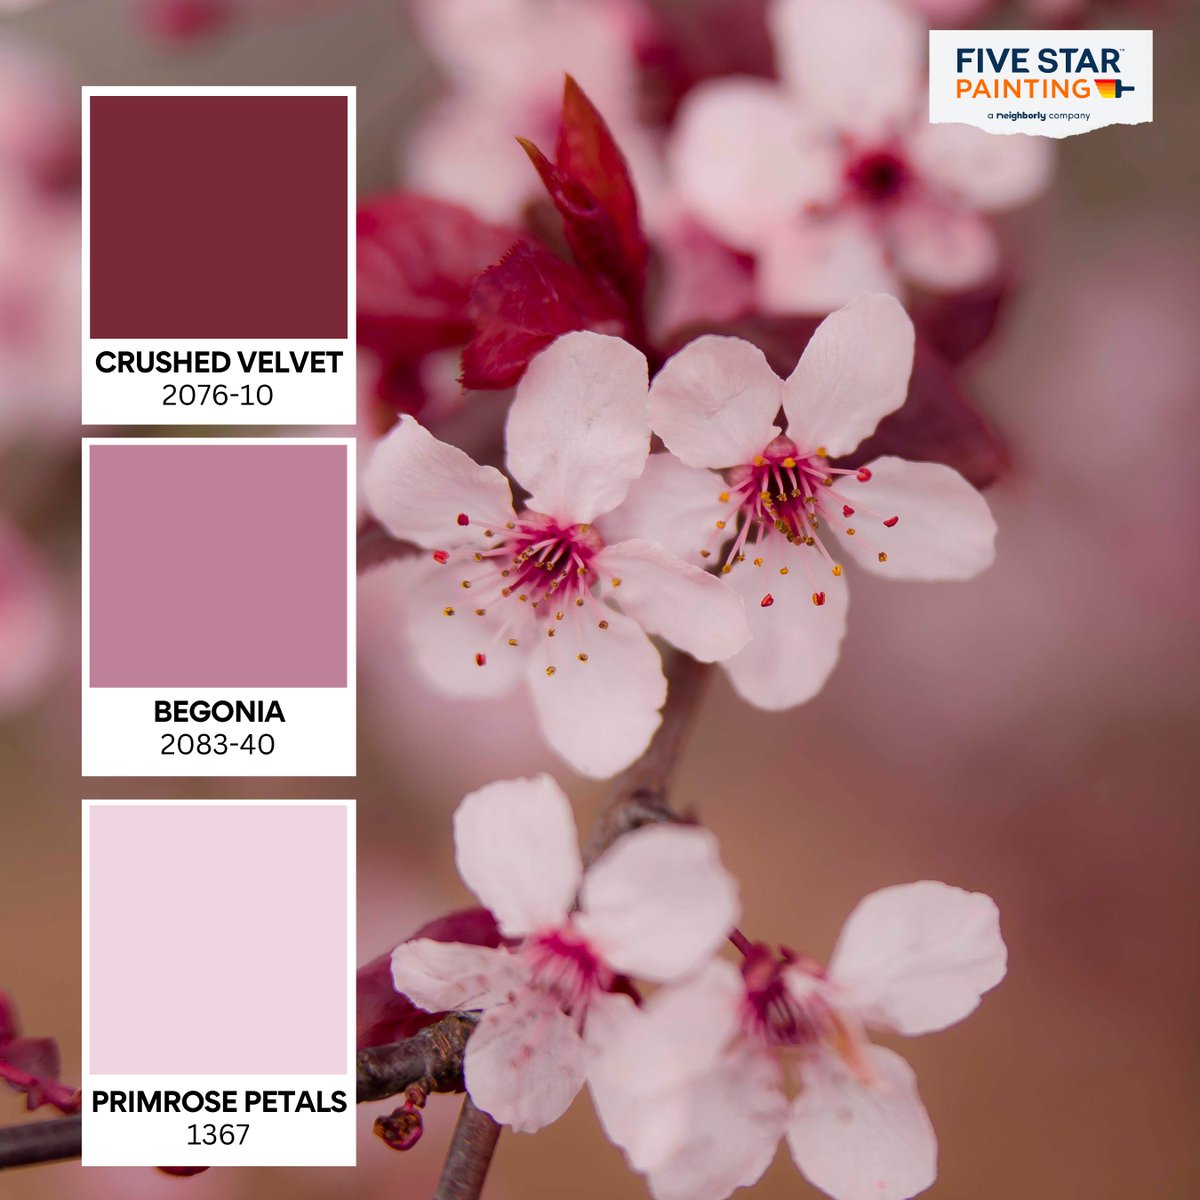 Explore the Benjamin Moore palette for inspiration in every hue. Let the vibrant colors evoke creativity in your space!

#colorinspiration #colorseason